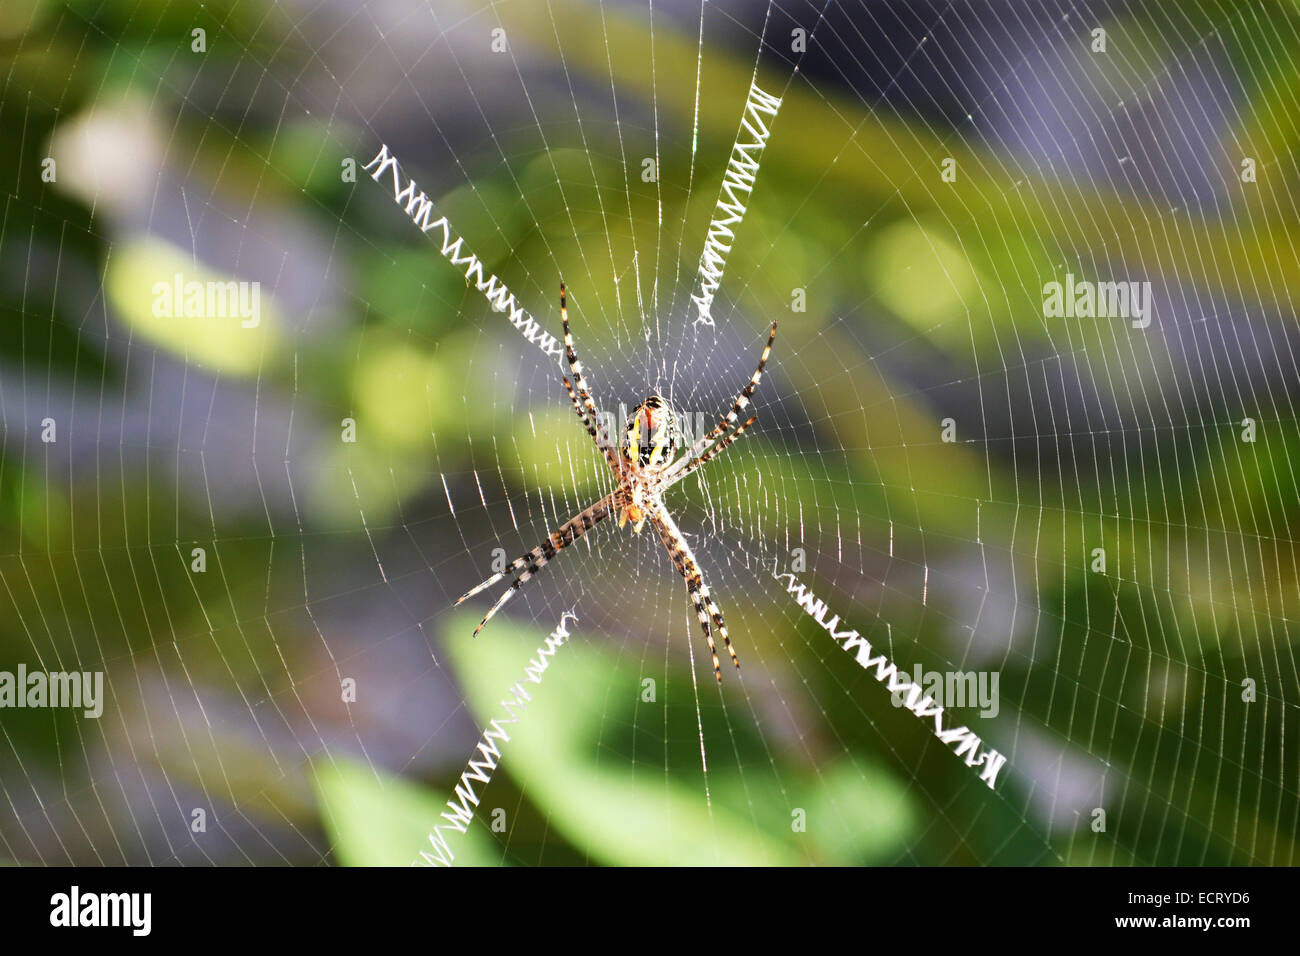 Female Argiope trifasciata Spider AKA banded Argiope with giant web and four attention track lines on a tree Stock Photo